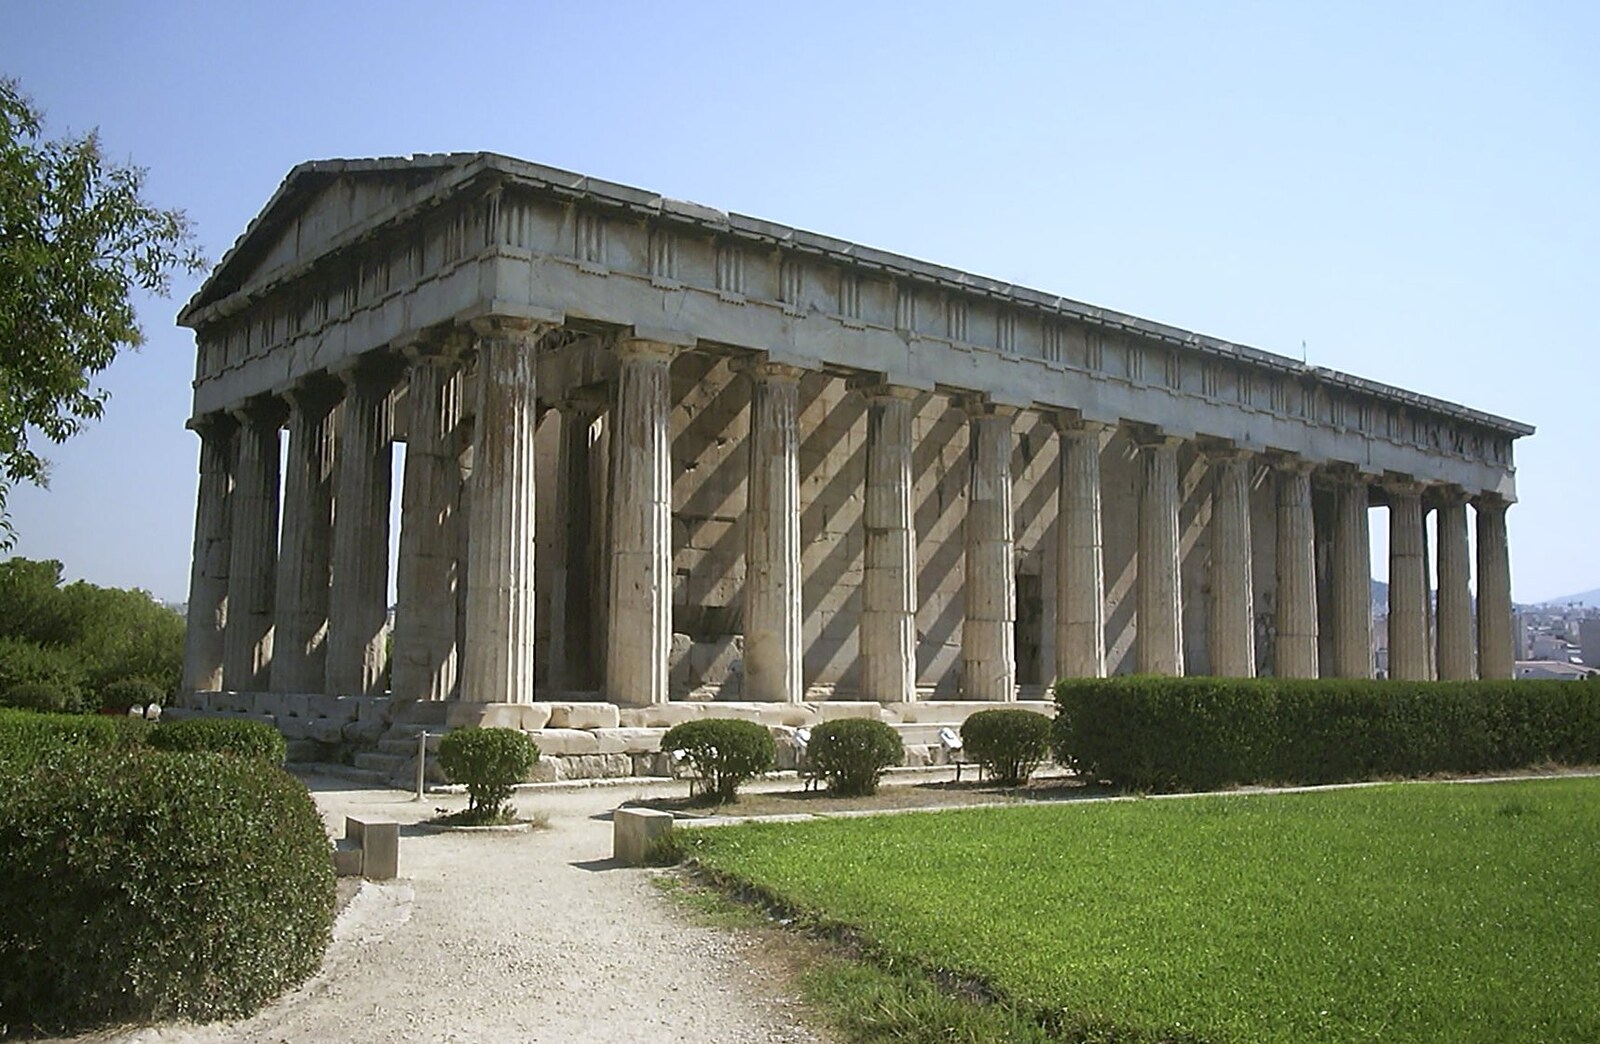 A Postcard From Athens: A Day Trip to the Olympics, Greece - 19th August 2004: The Temple of Hephaistos (5th c. BC)